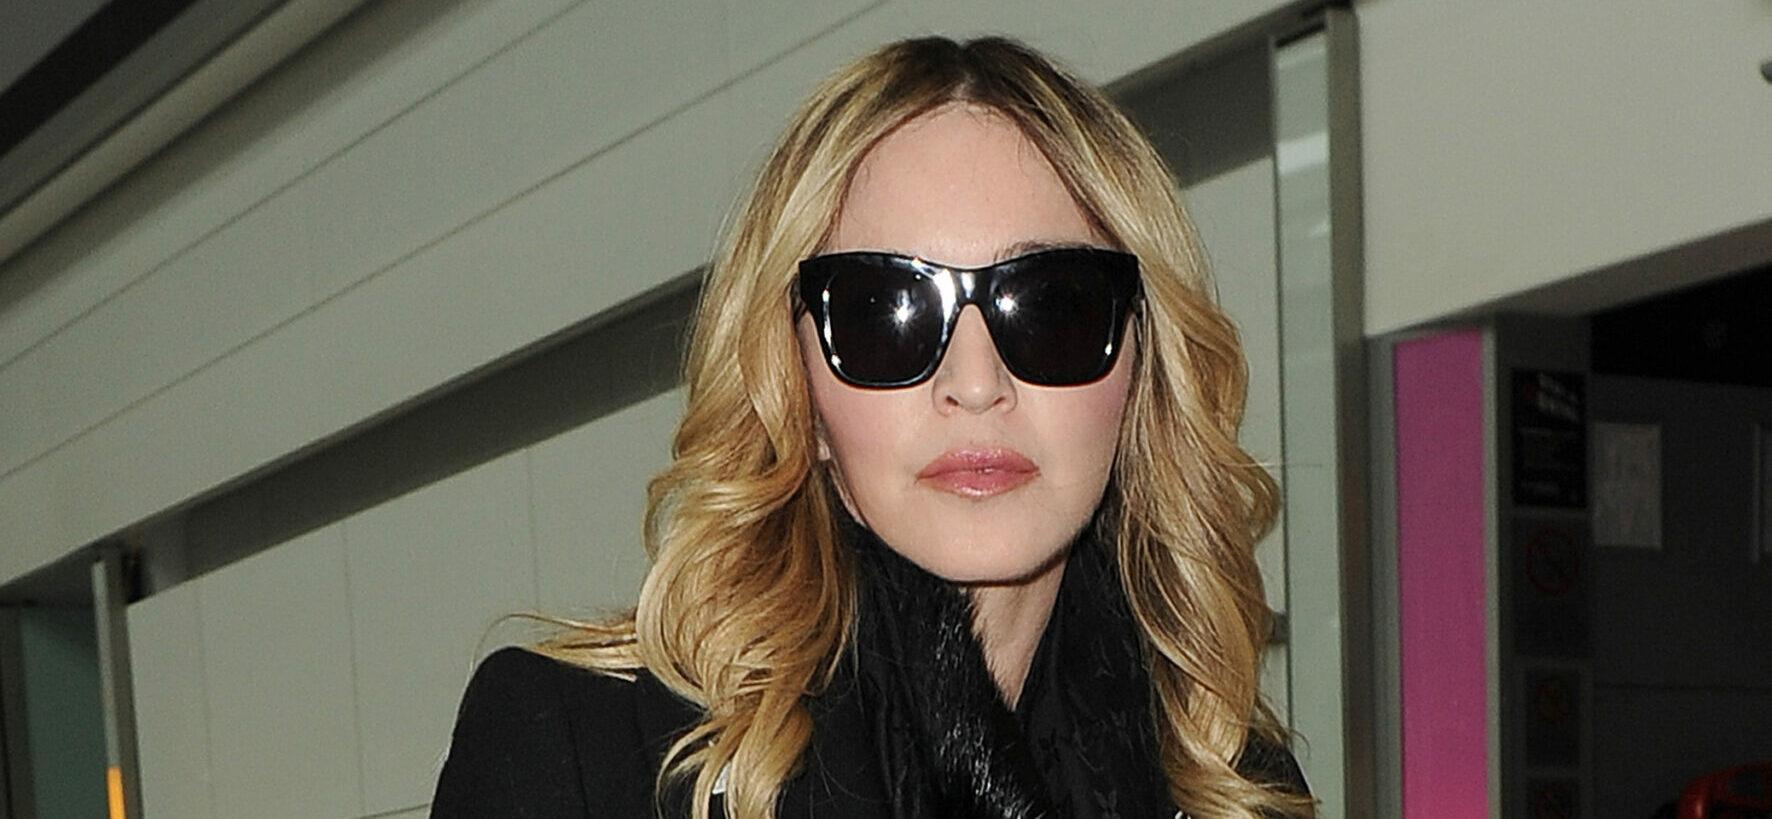 Madonna Breaks Silence On Older Brother Anthony’s Death & The ‘Important Seeds’ He Planted